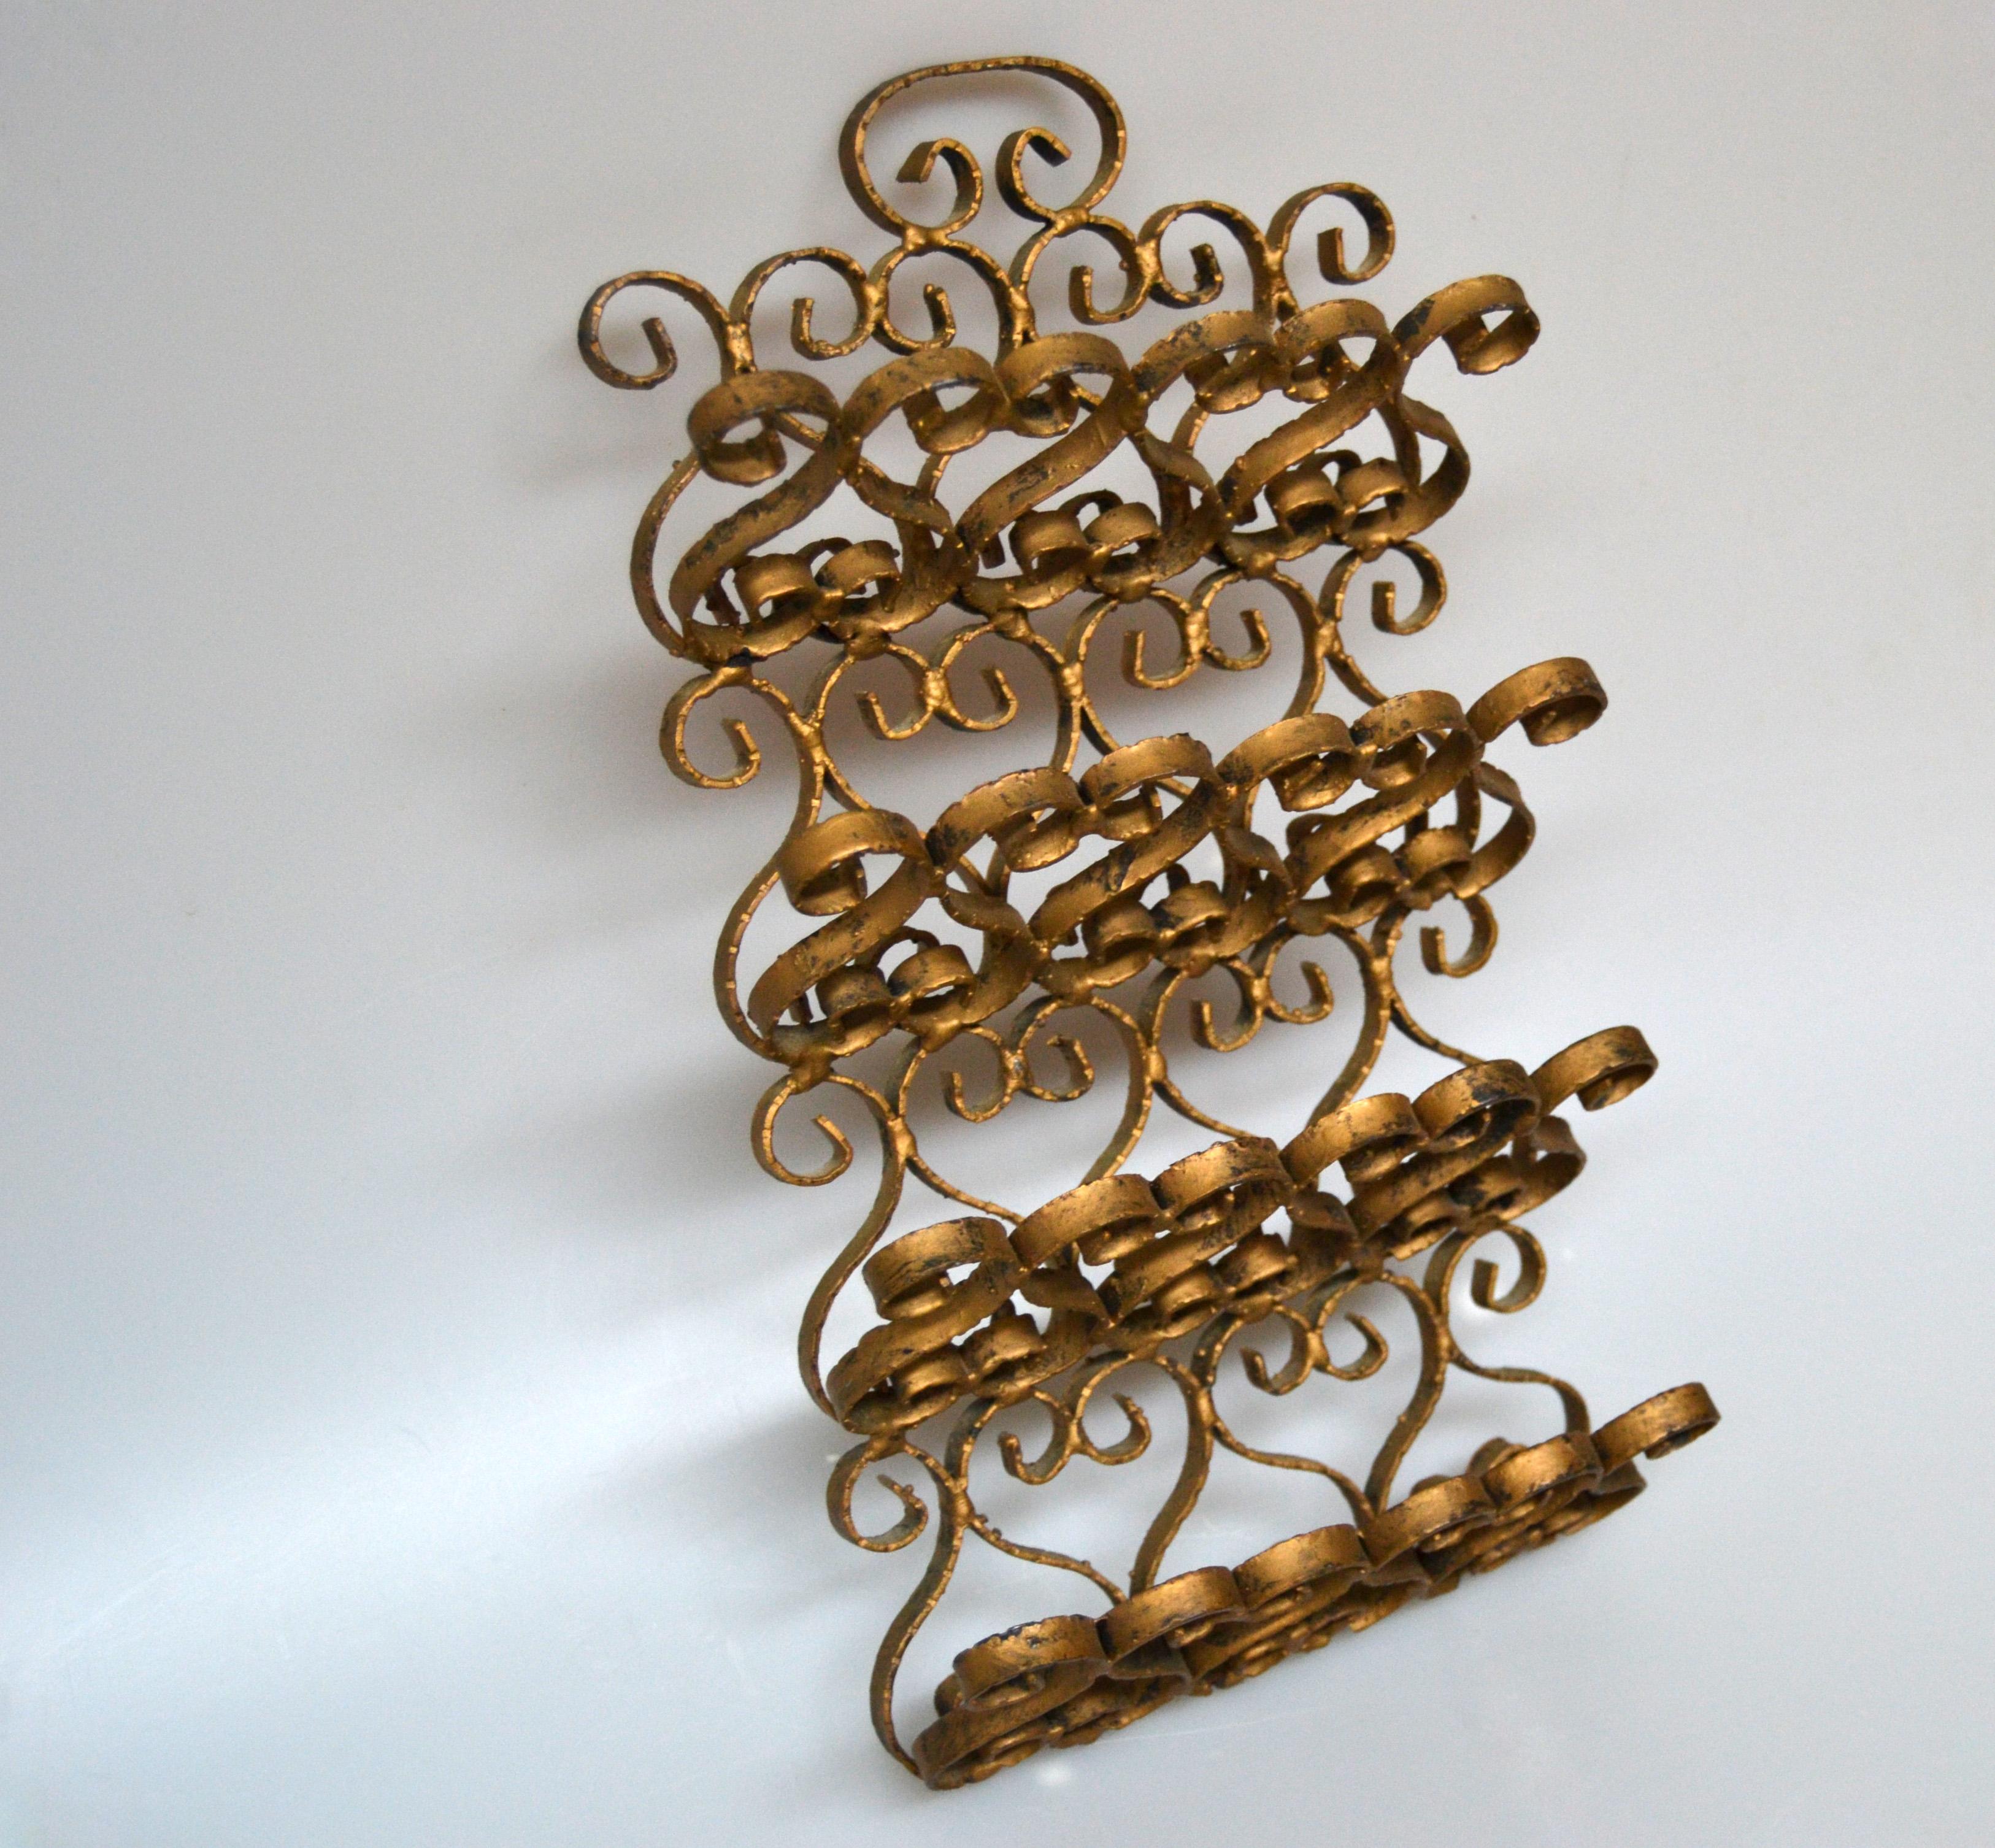 Gilt Art Nouveau Whimsical Handcrafted Golden Wrought Iron Letter, Recipe Organizer